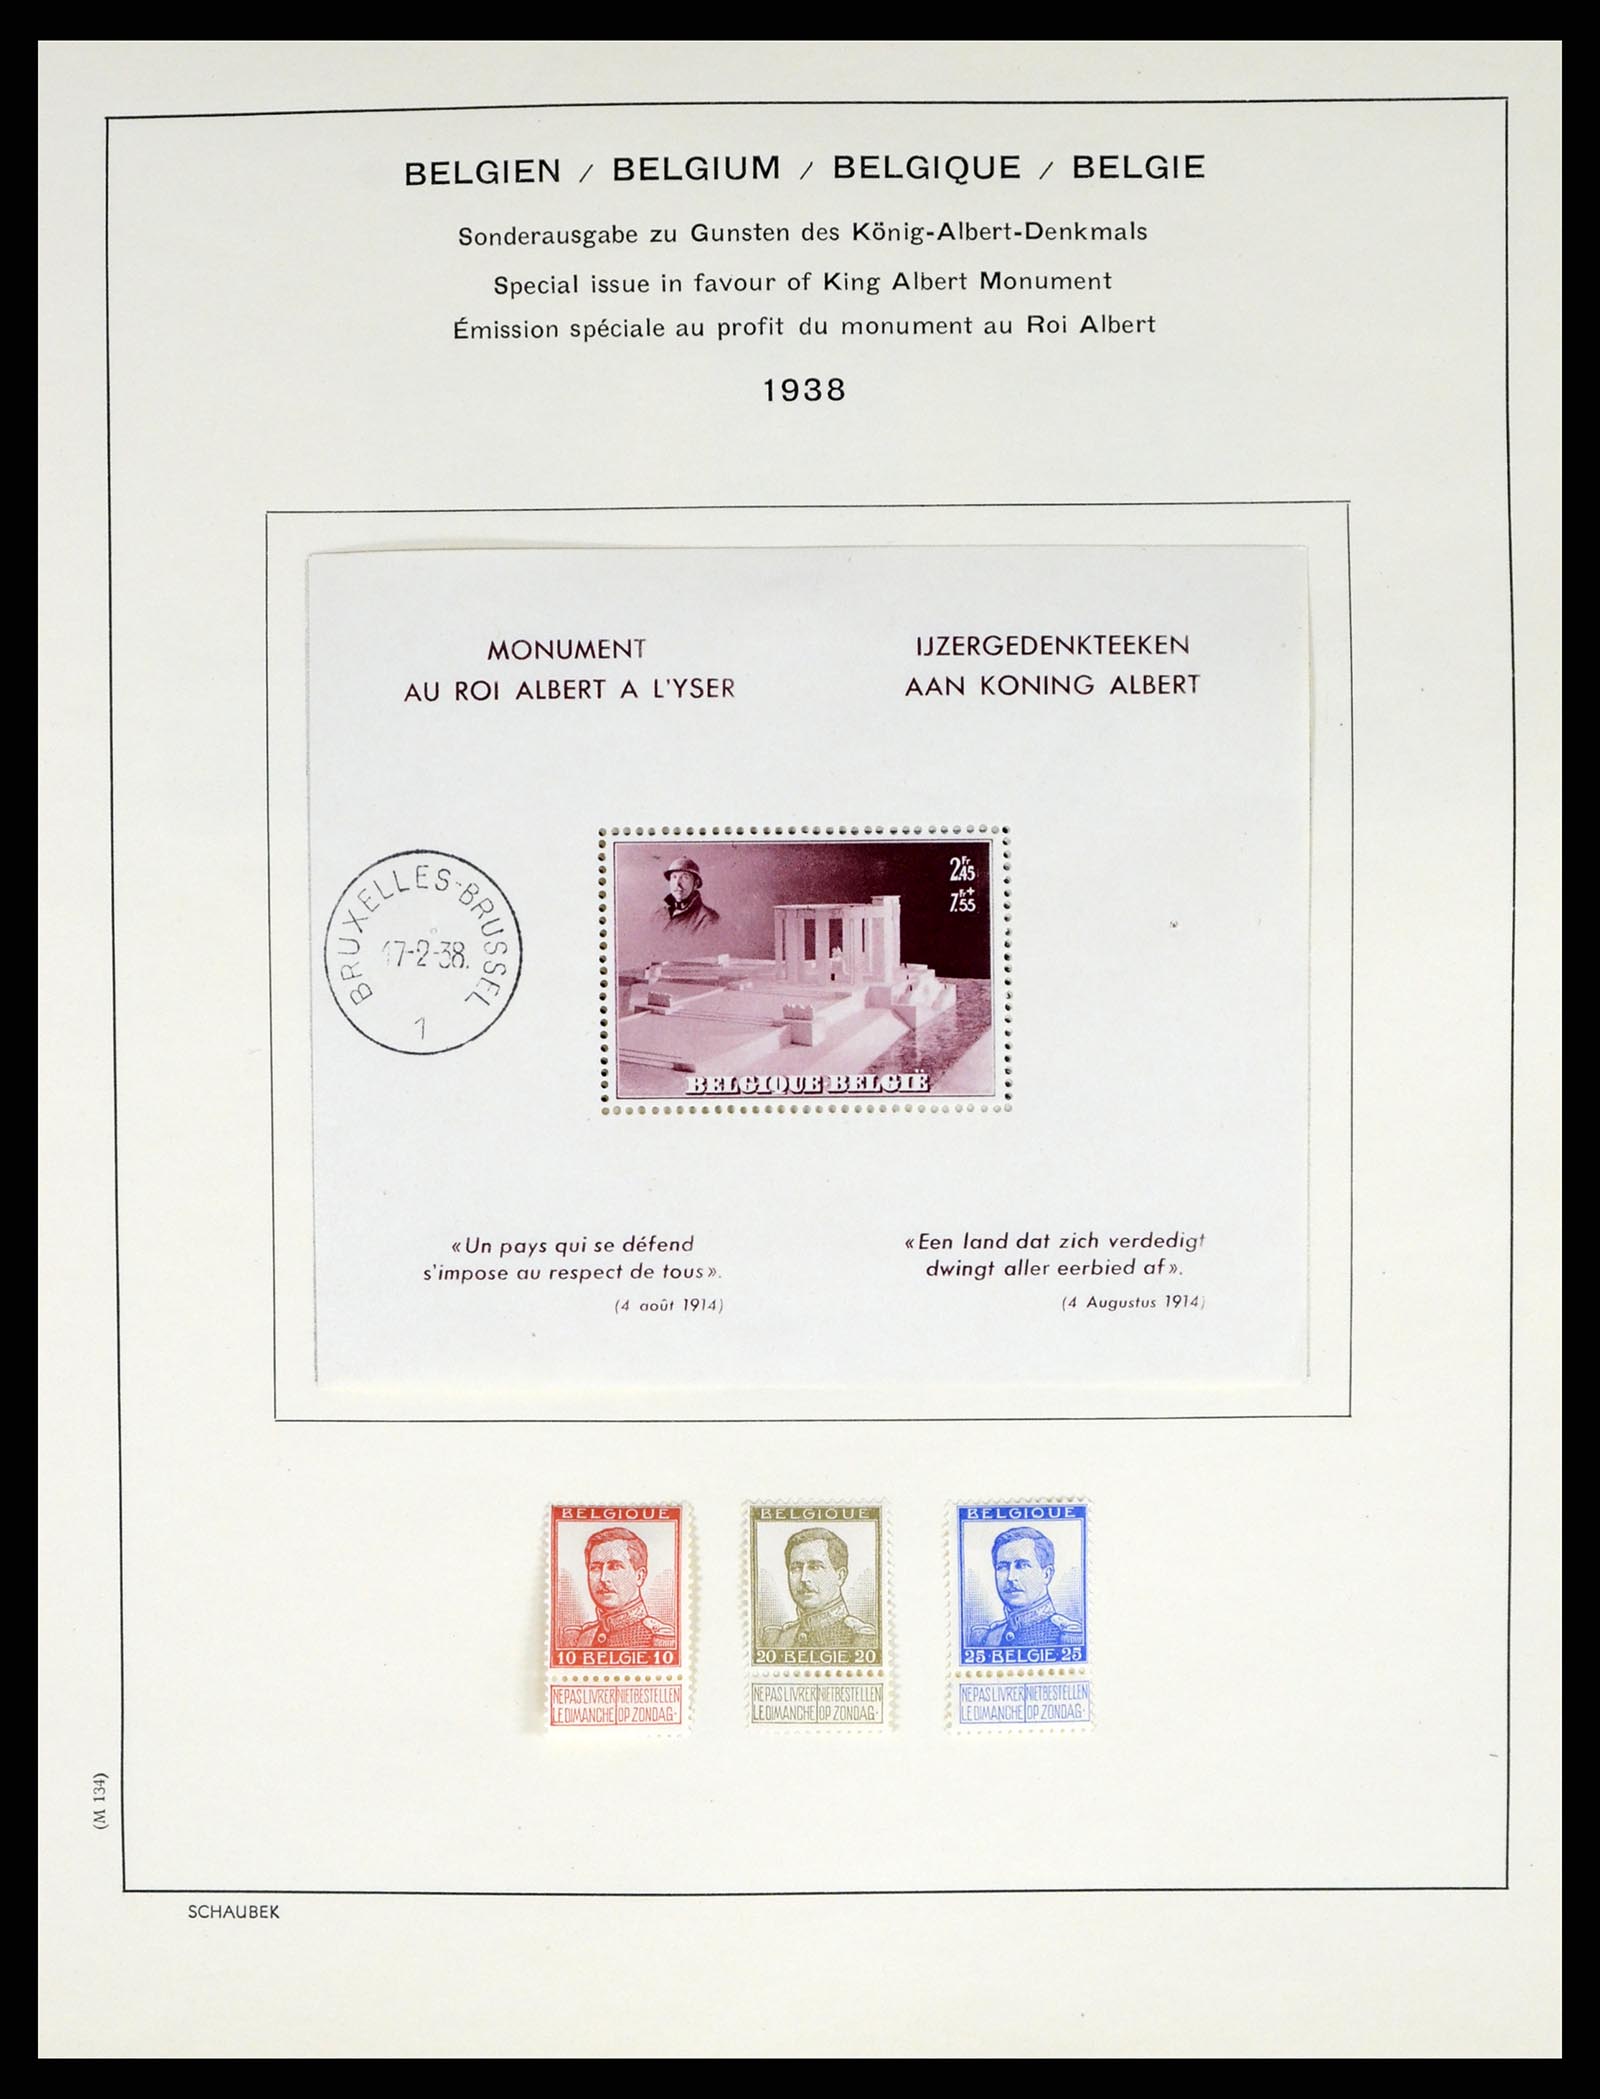 37595 033 - Stamp collection 37595 Super collection Belgium 1849-2015!